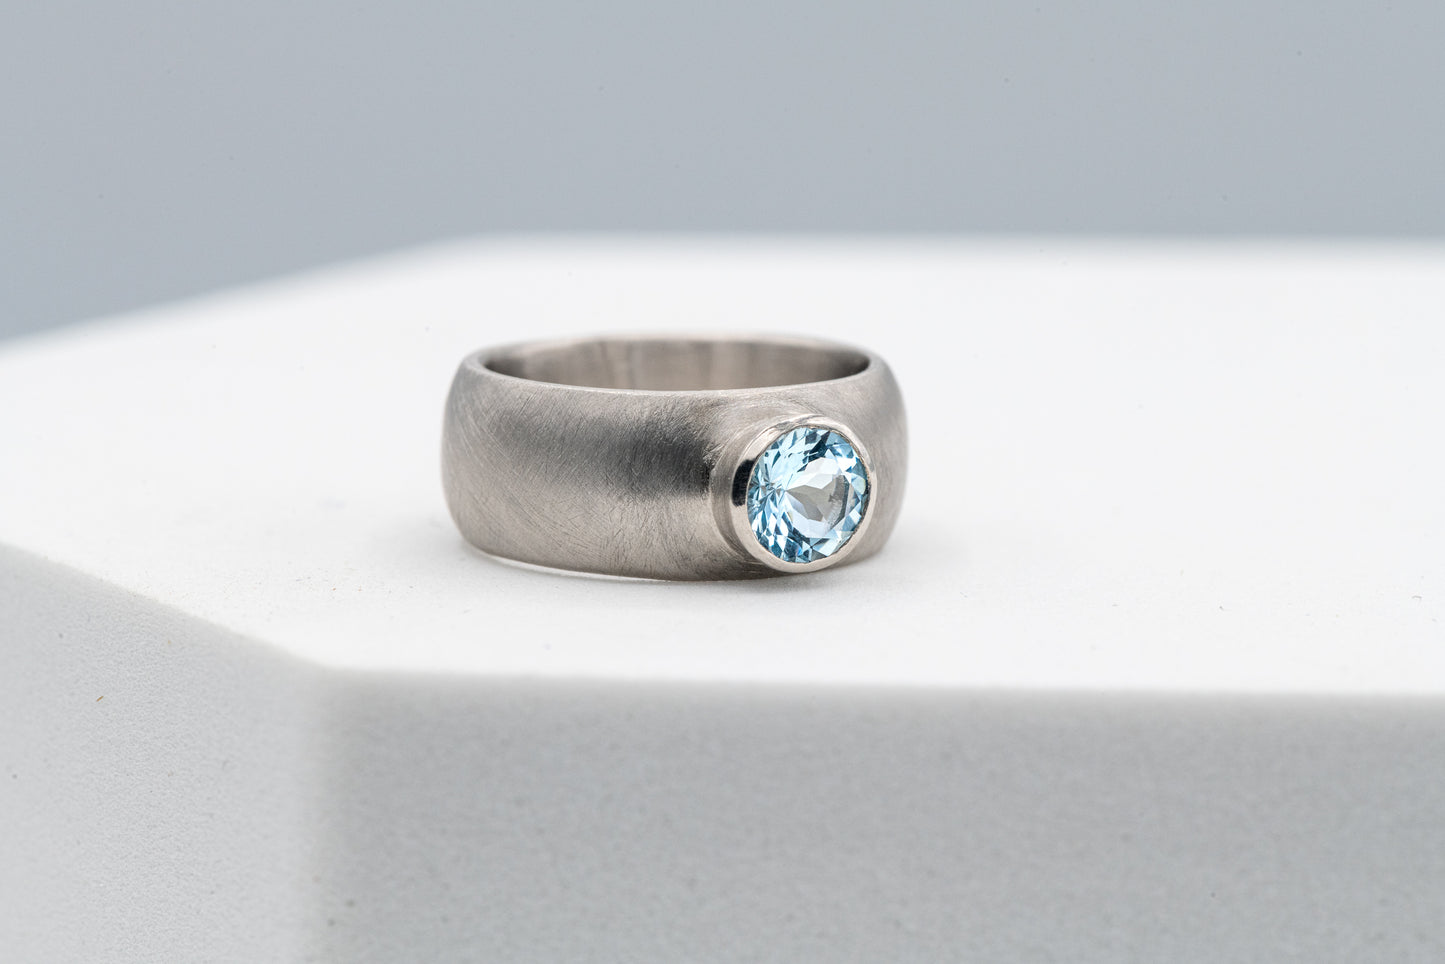 A handmade Chunky White Gold Engagement Ring with a blue topaz stone by Cassin Jewelry.